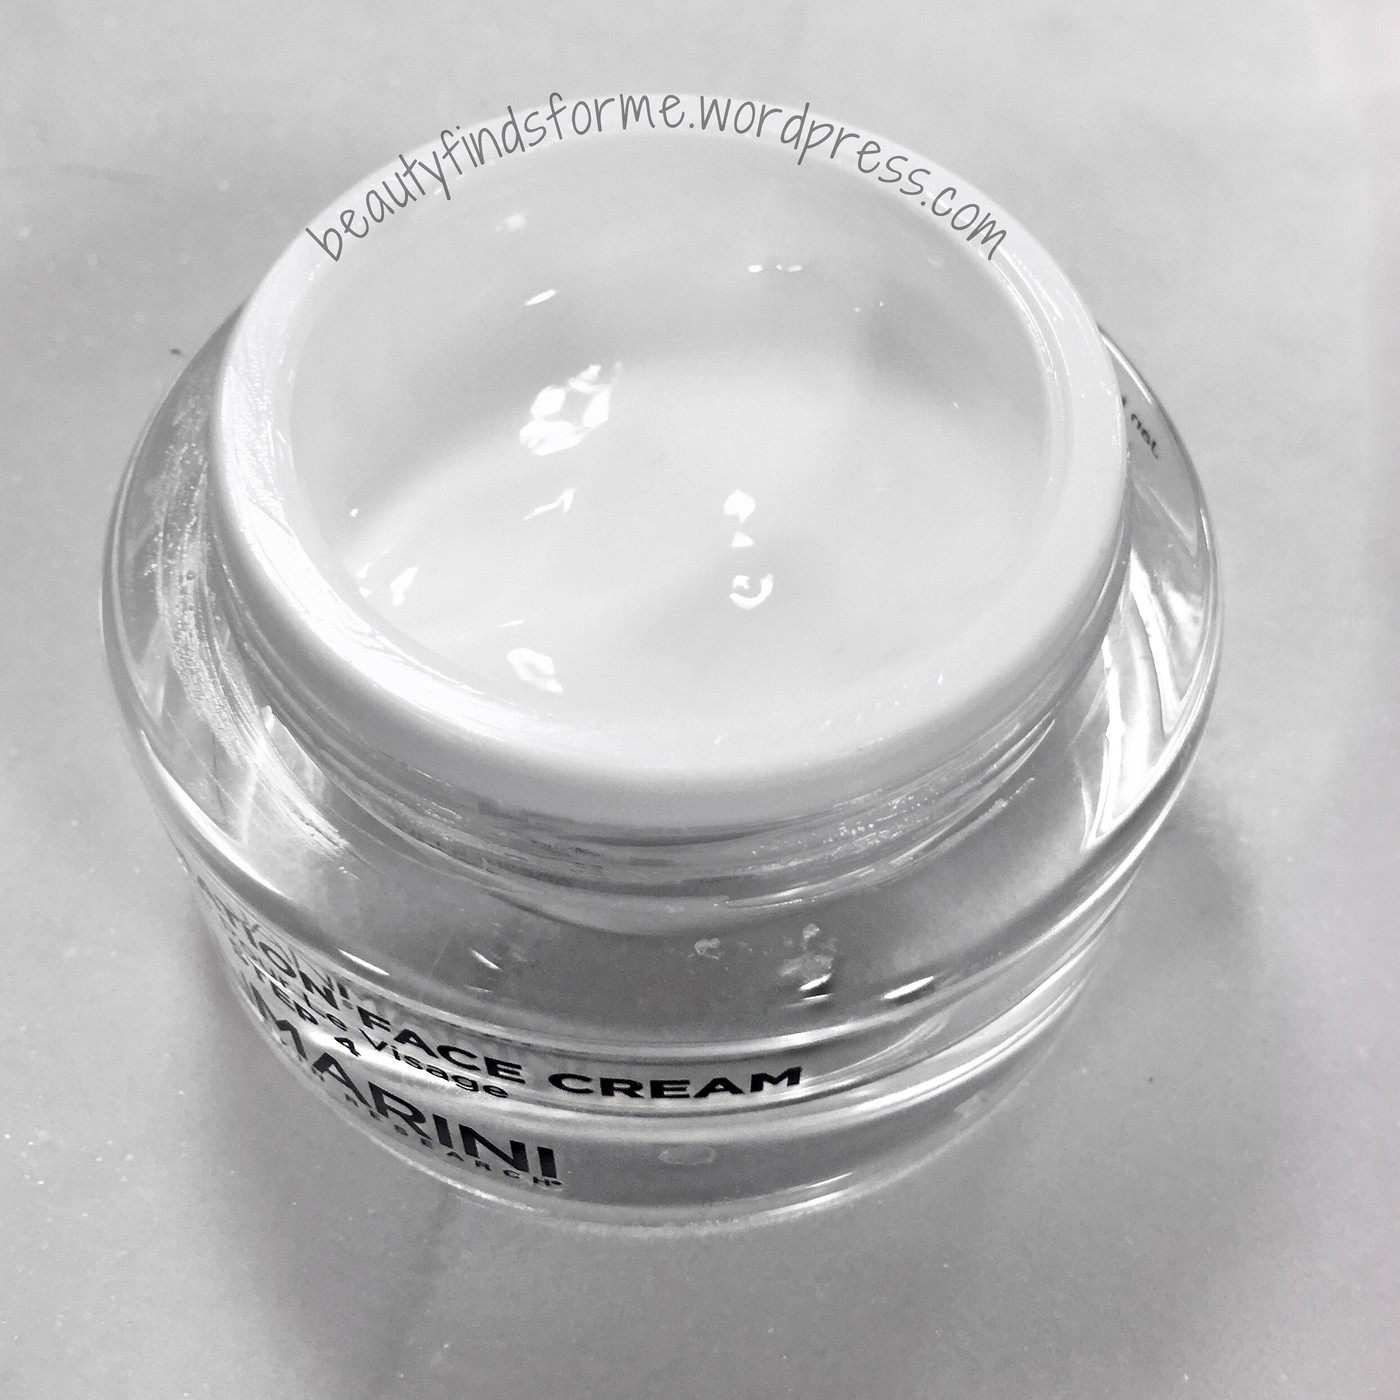 Jan Marini Transformation Face Cream Review – Unboxing Beauty